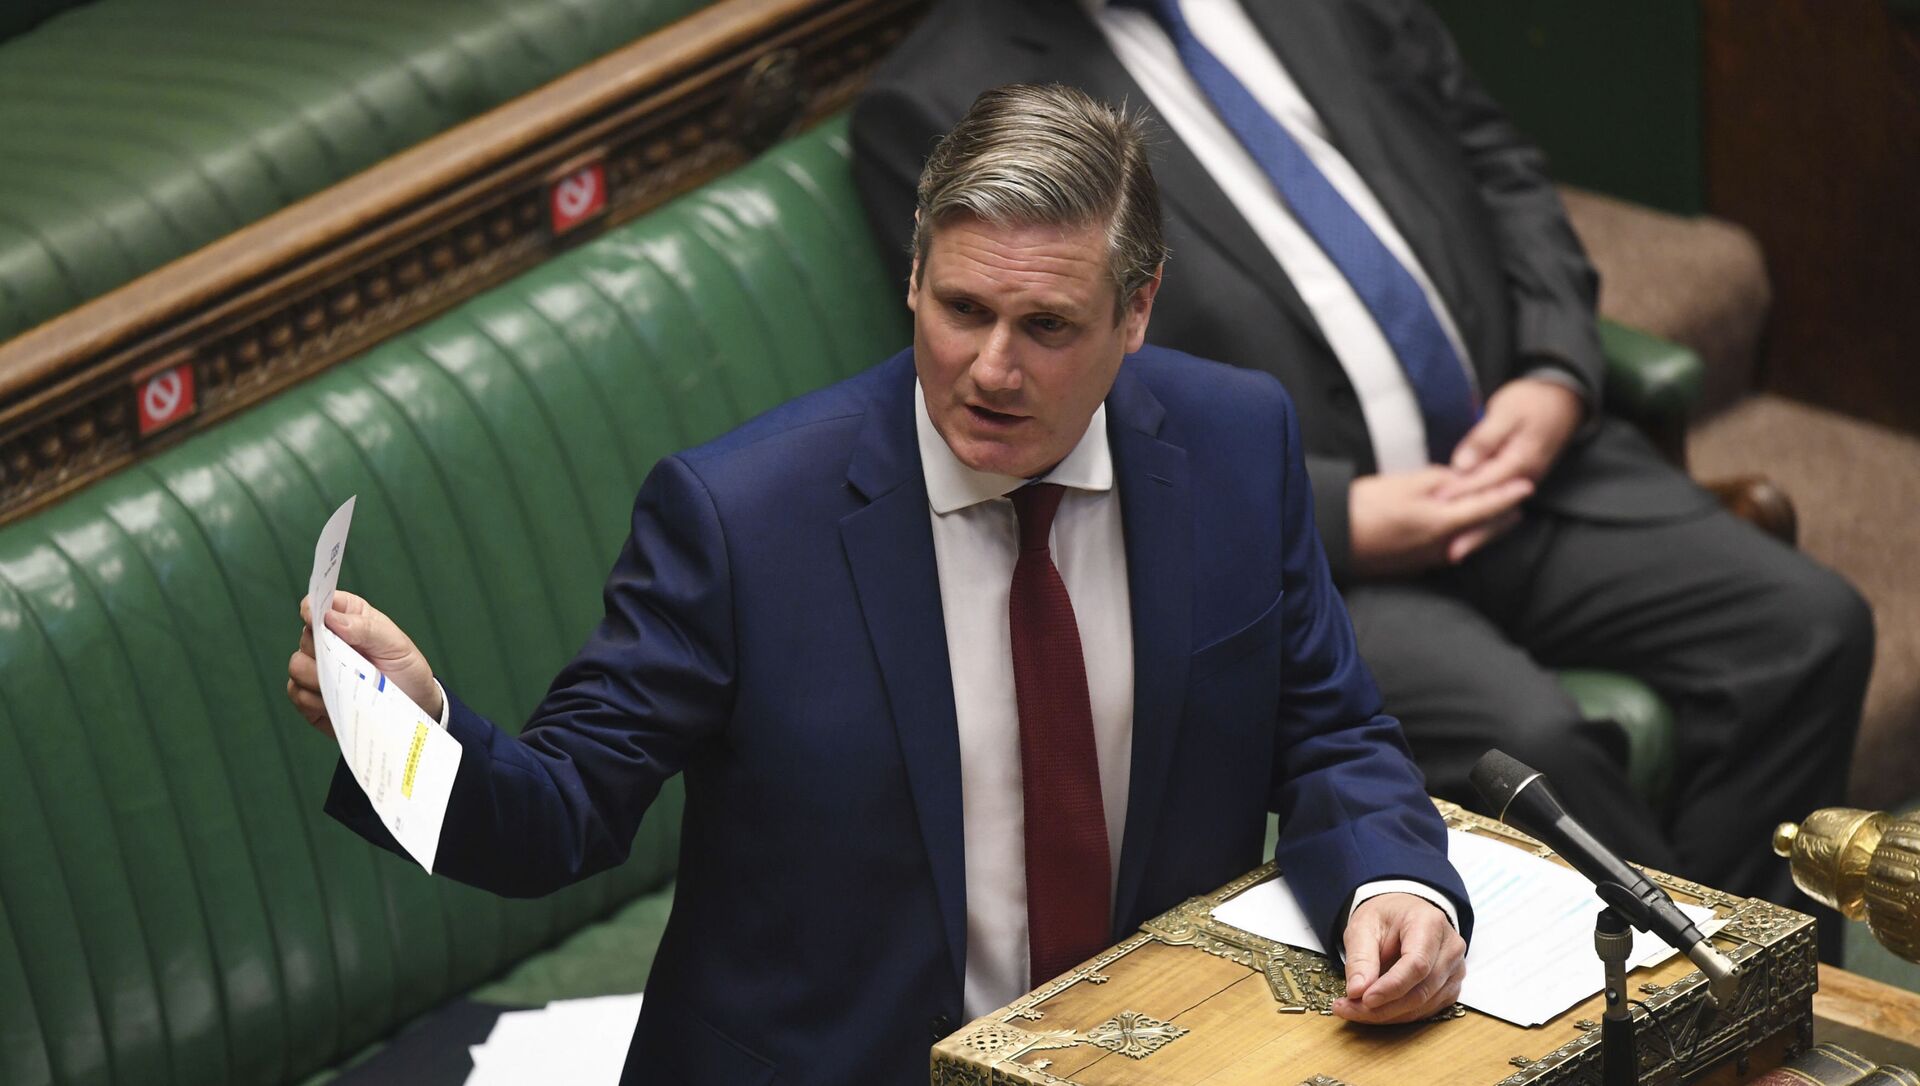 In this handout photo provided by UK Parliament, Britain's Labour leader Keir Starmer speaks during Prime Minister's Questions in the House of Commons, London, Wednesday, June 24, 2020. - Sputnik International, 1920, 29.04.2021